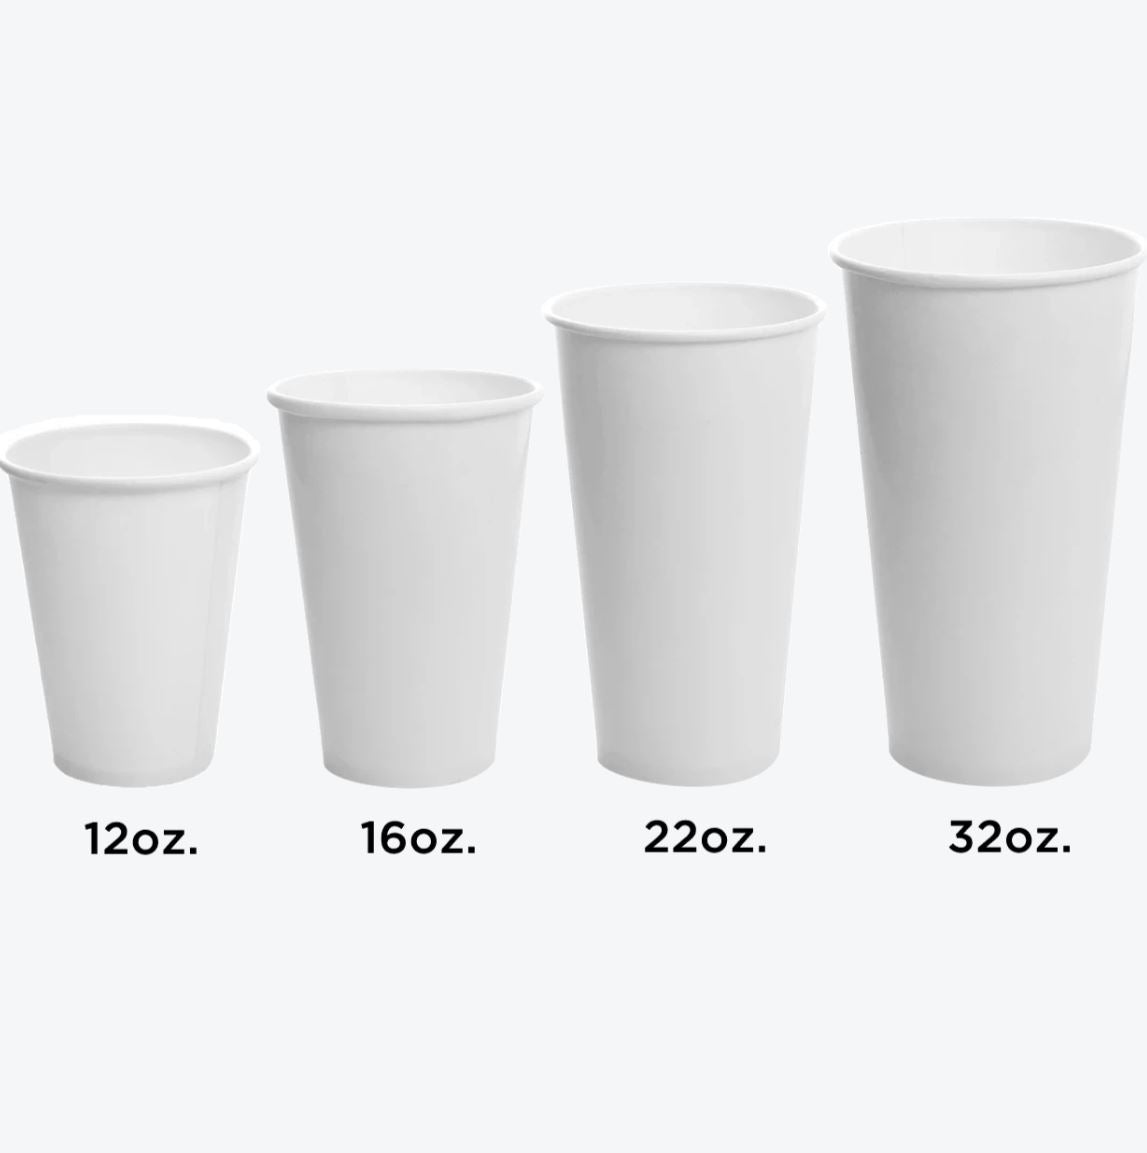 Printed White Paper Coffee Cup 16 oz. - 1000/Case 